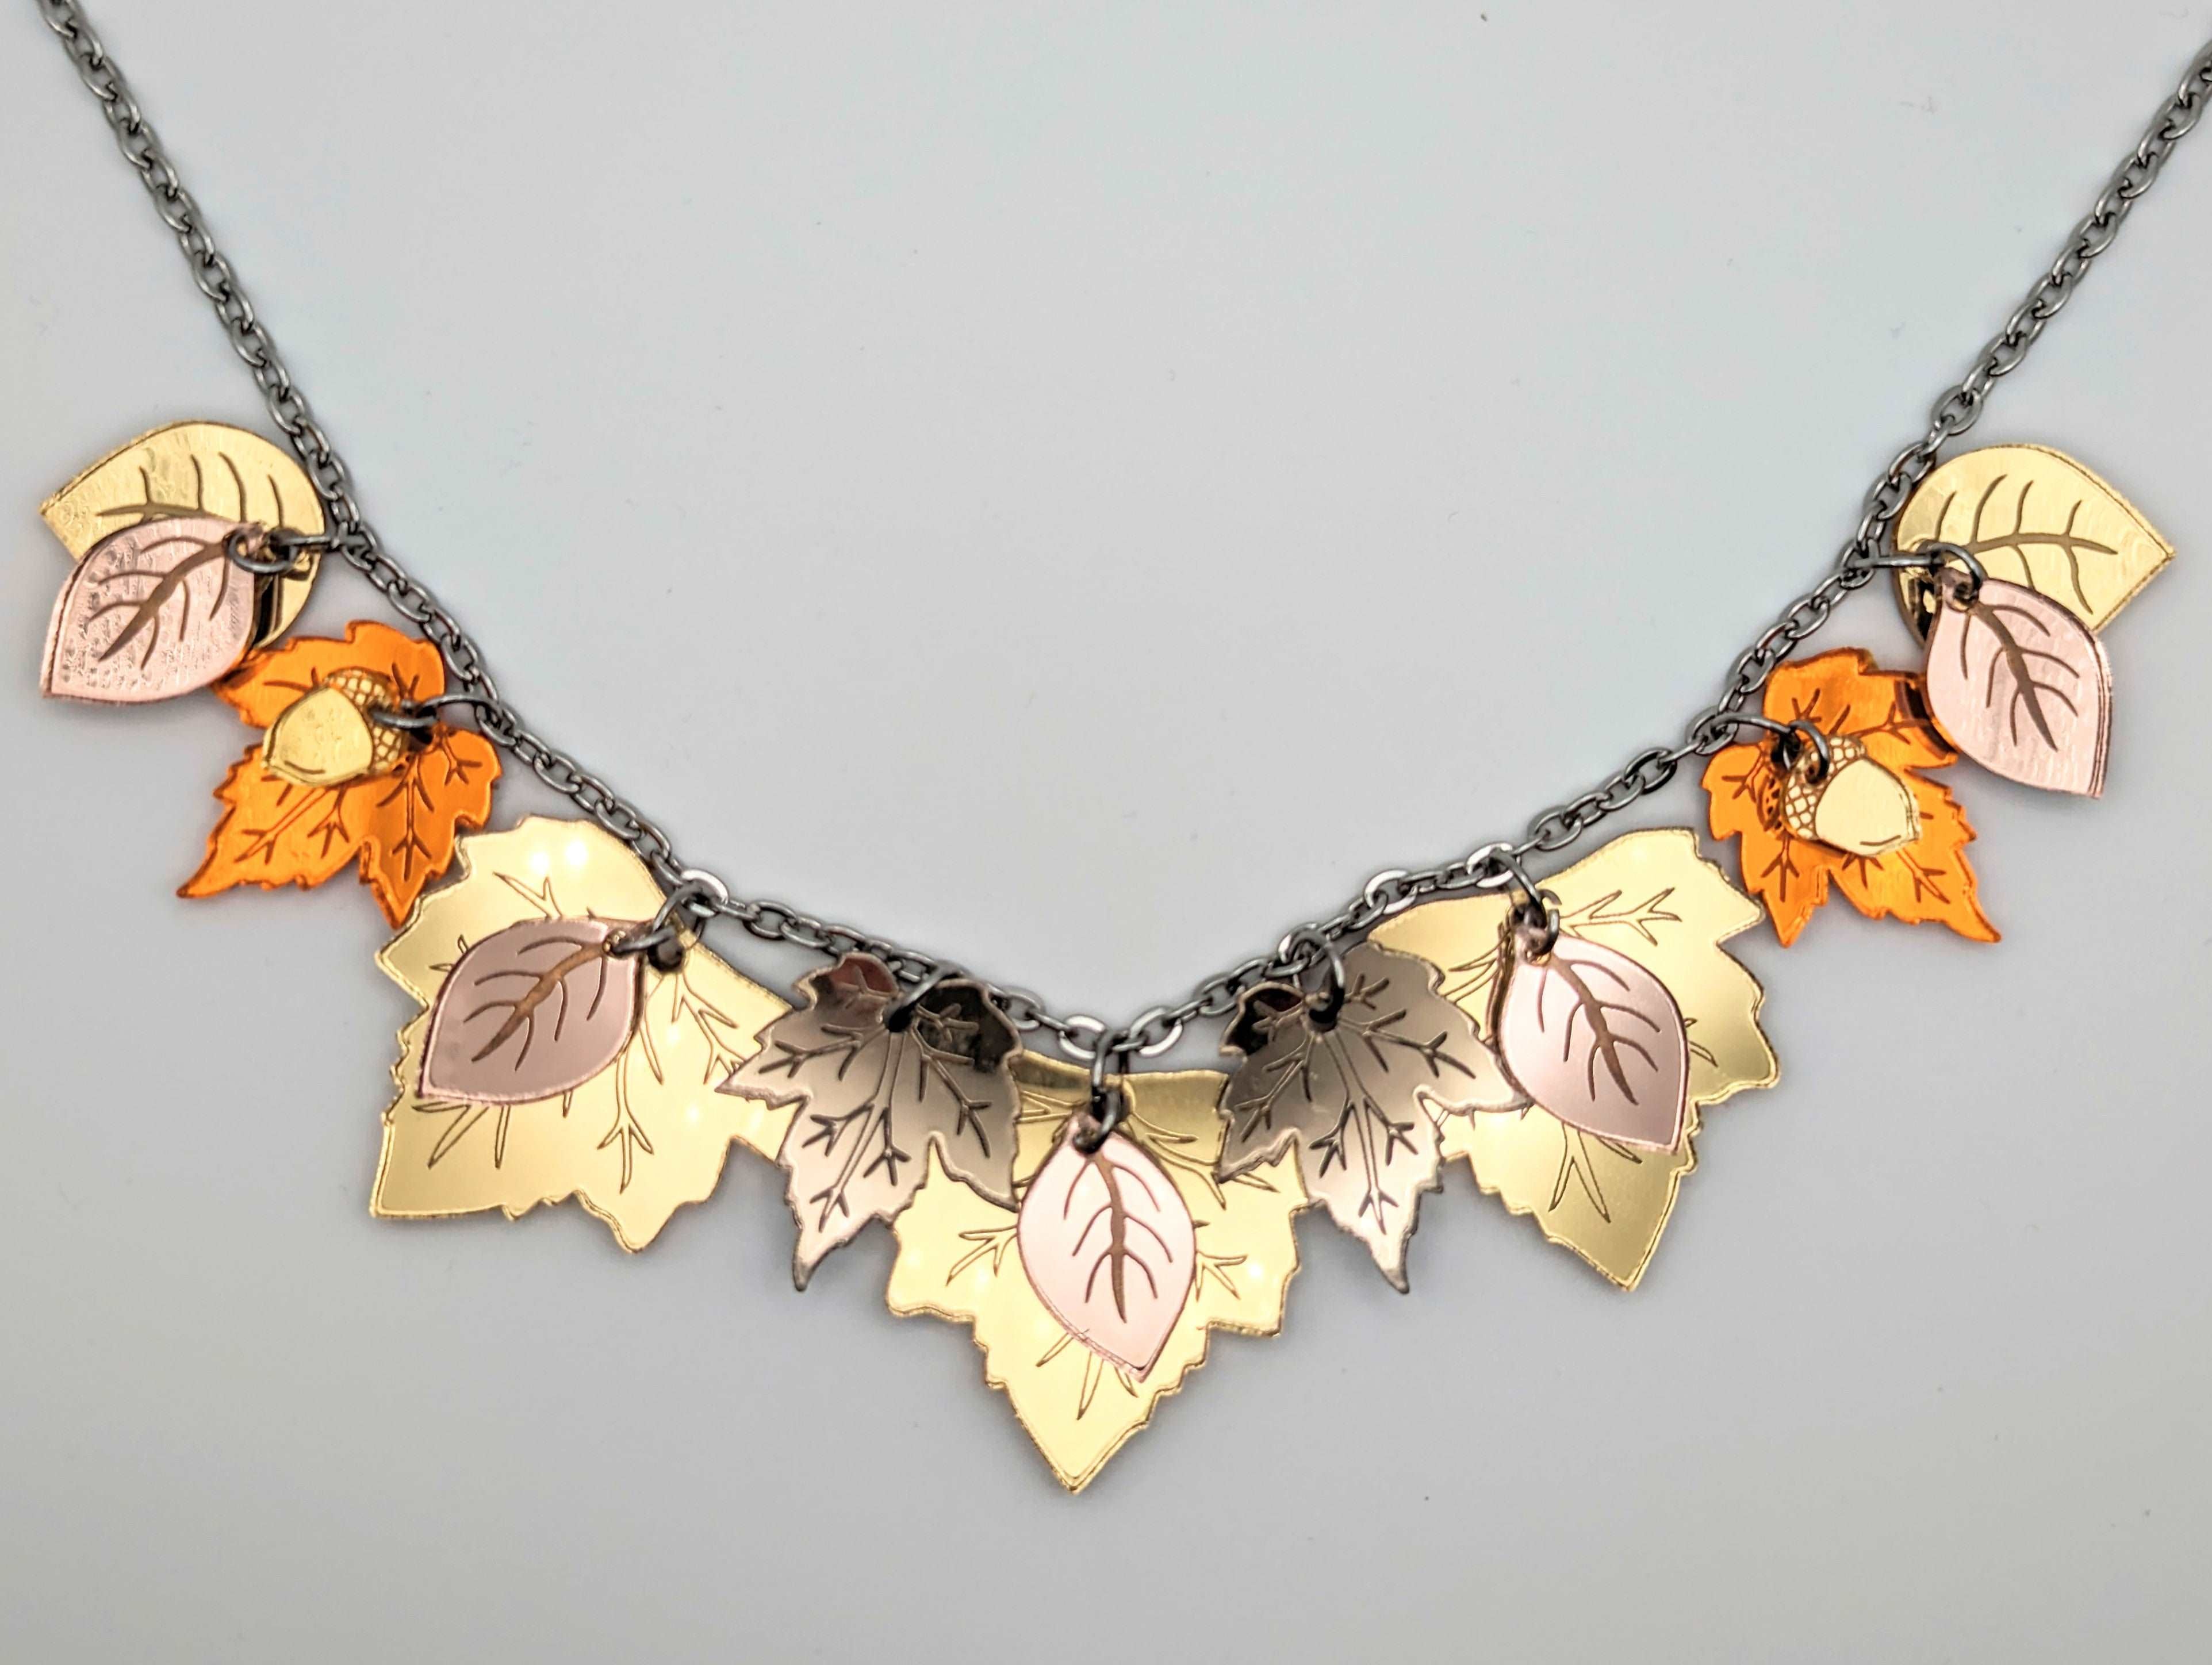 Laser cut filigree leather bib necklace, Gold necklace with nature-inspired  design - Teo Geo